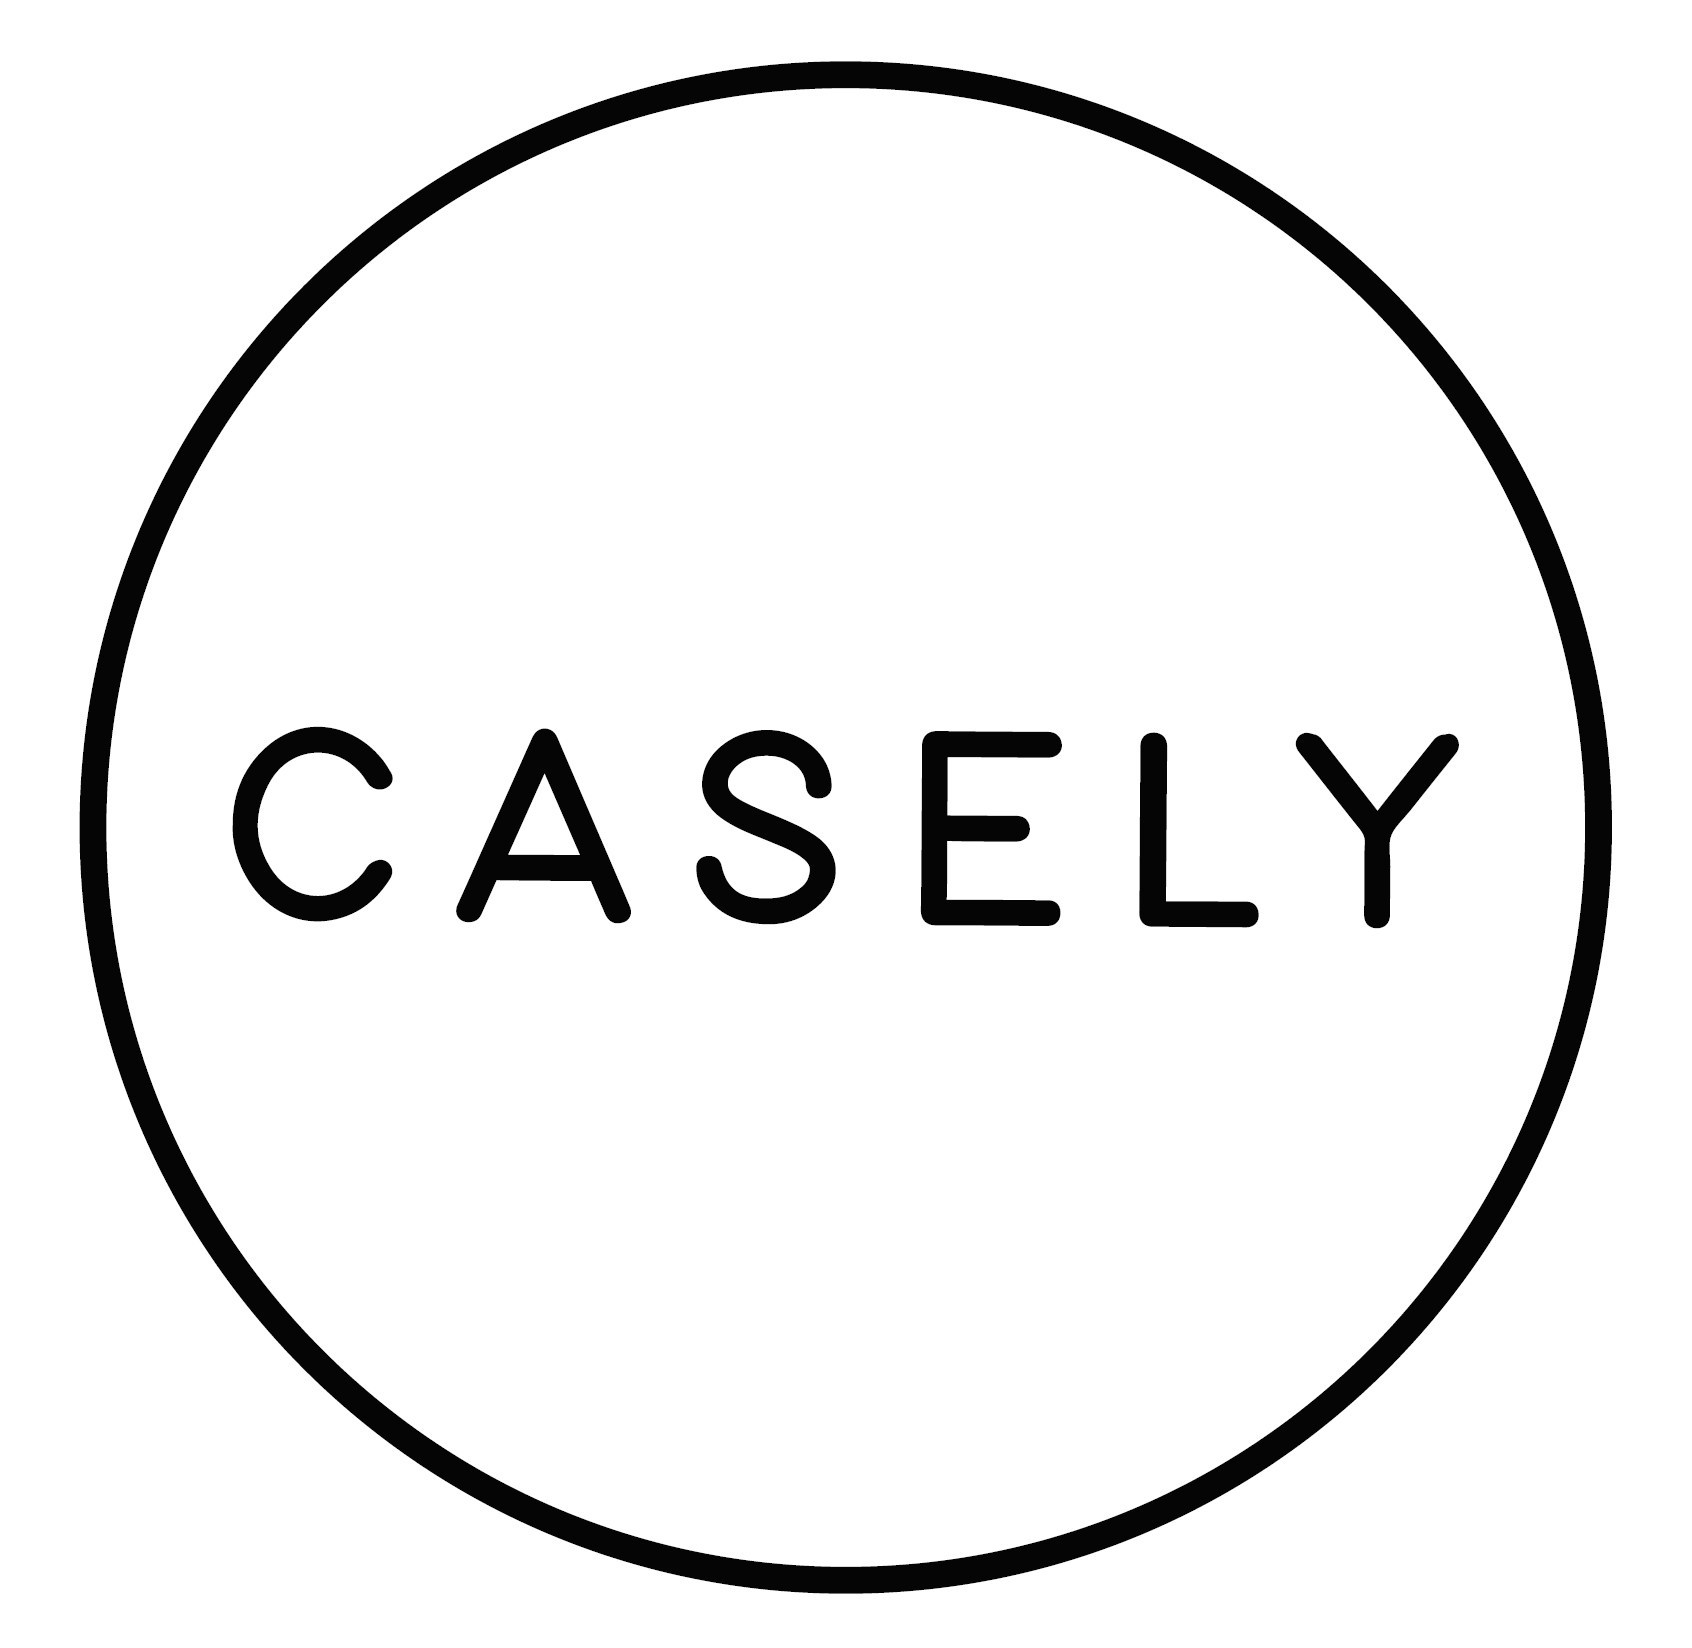 35% Off With Casely Coupon Code